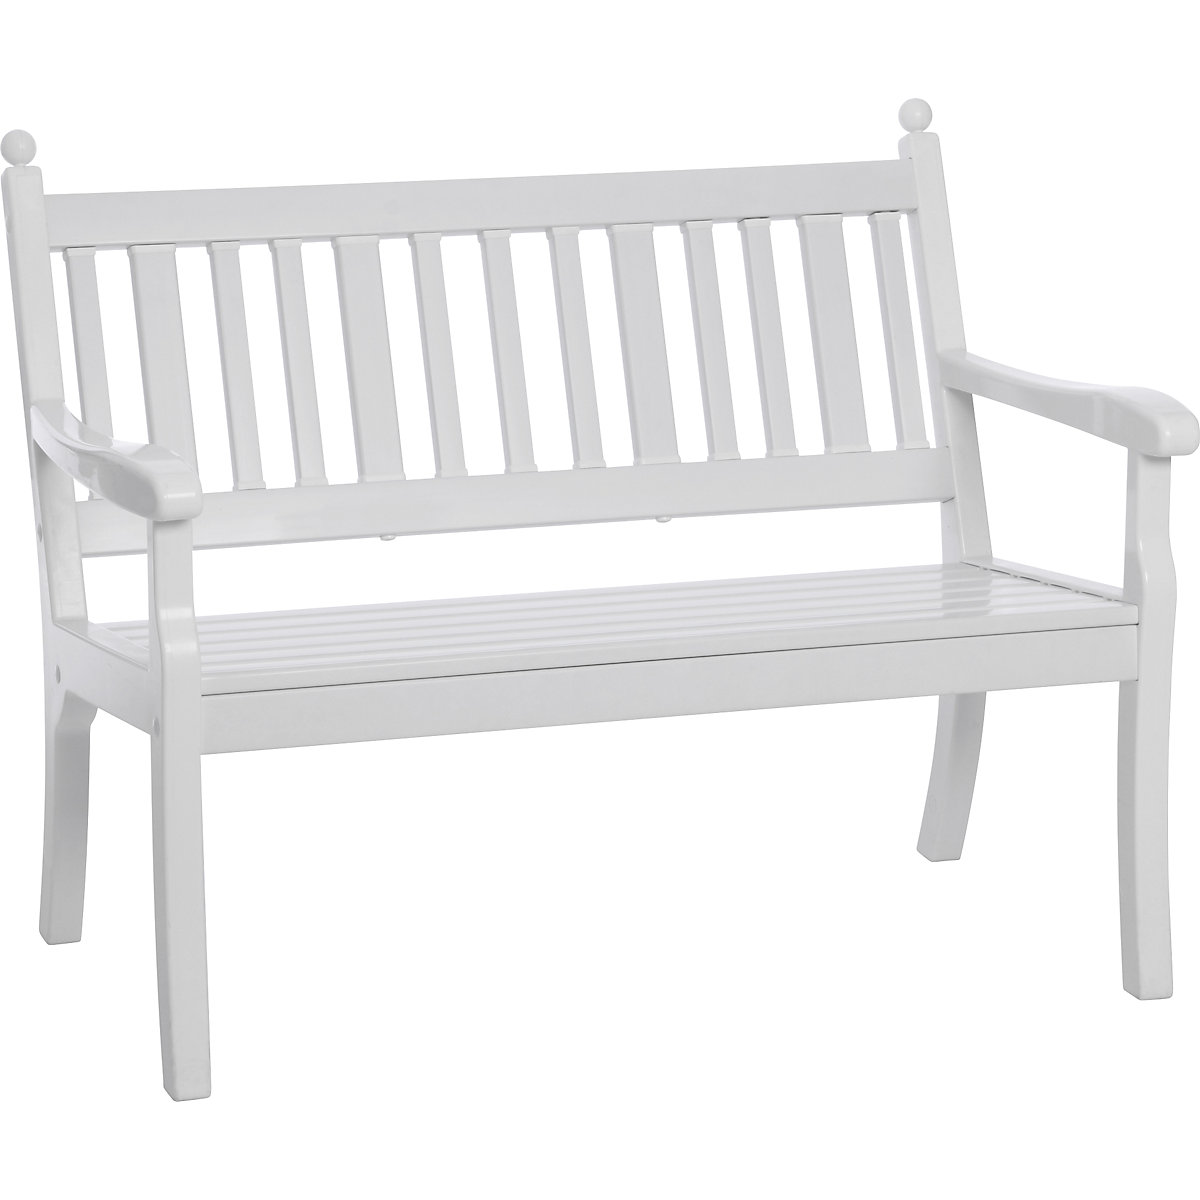 Seating bench, modern, HxD 880 x 690 mm, 2 seater-7